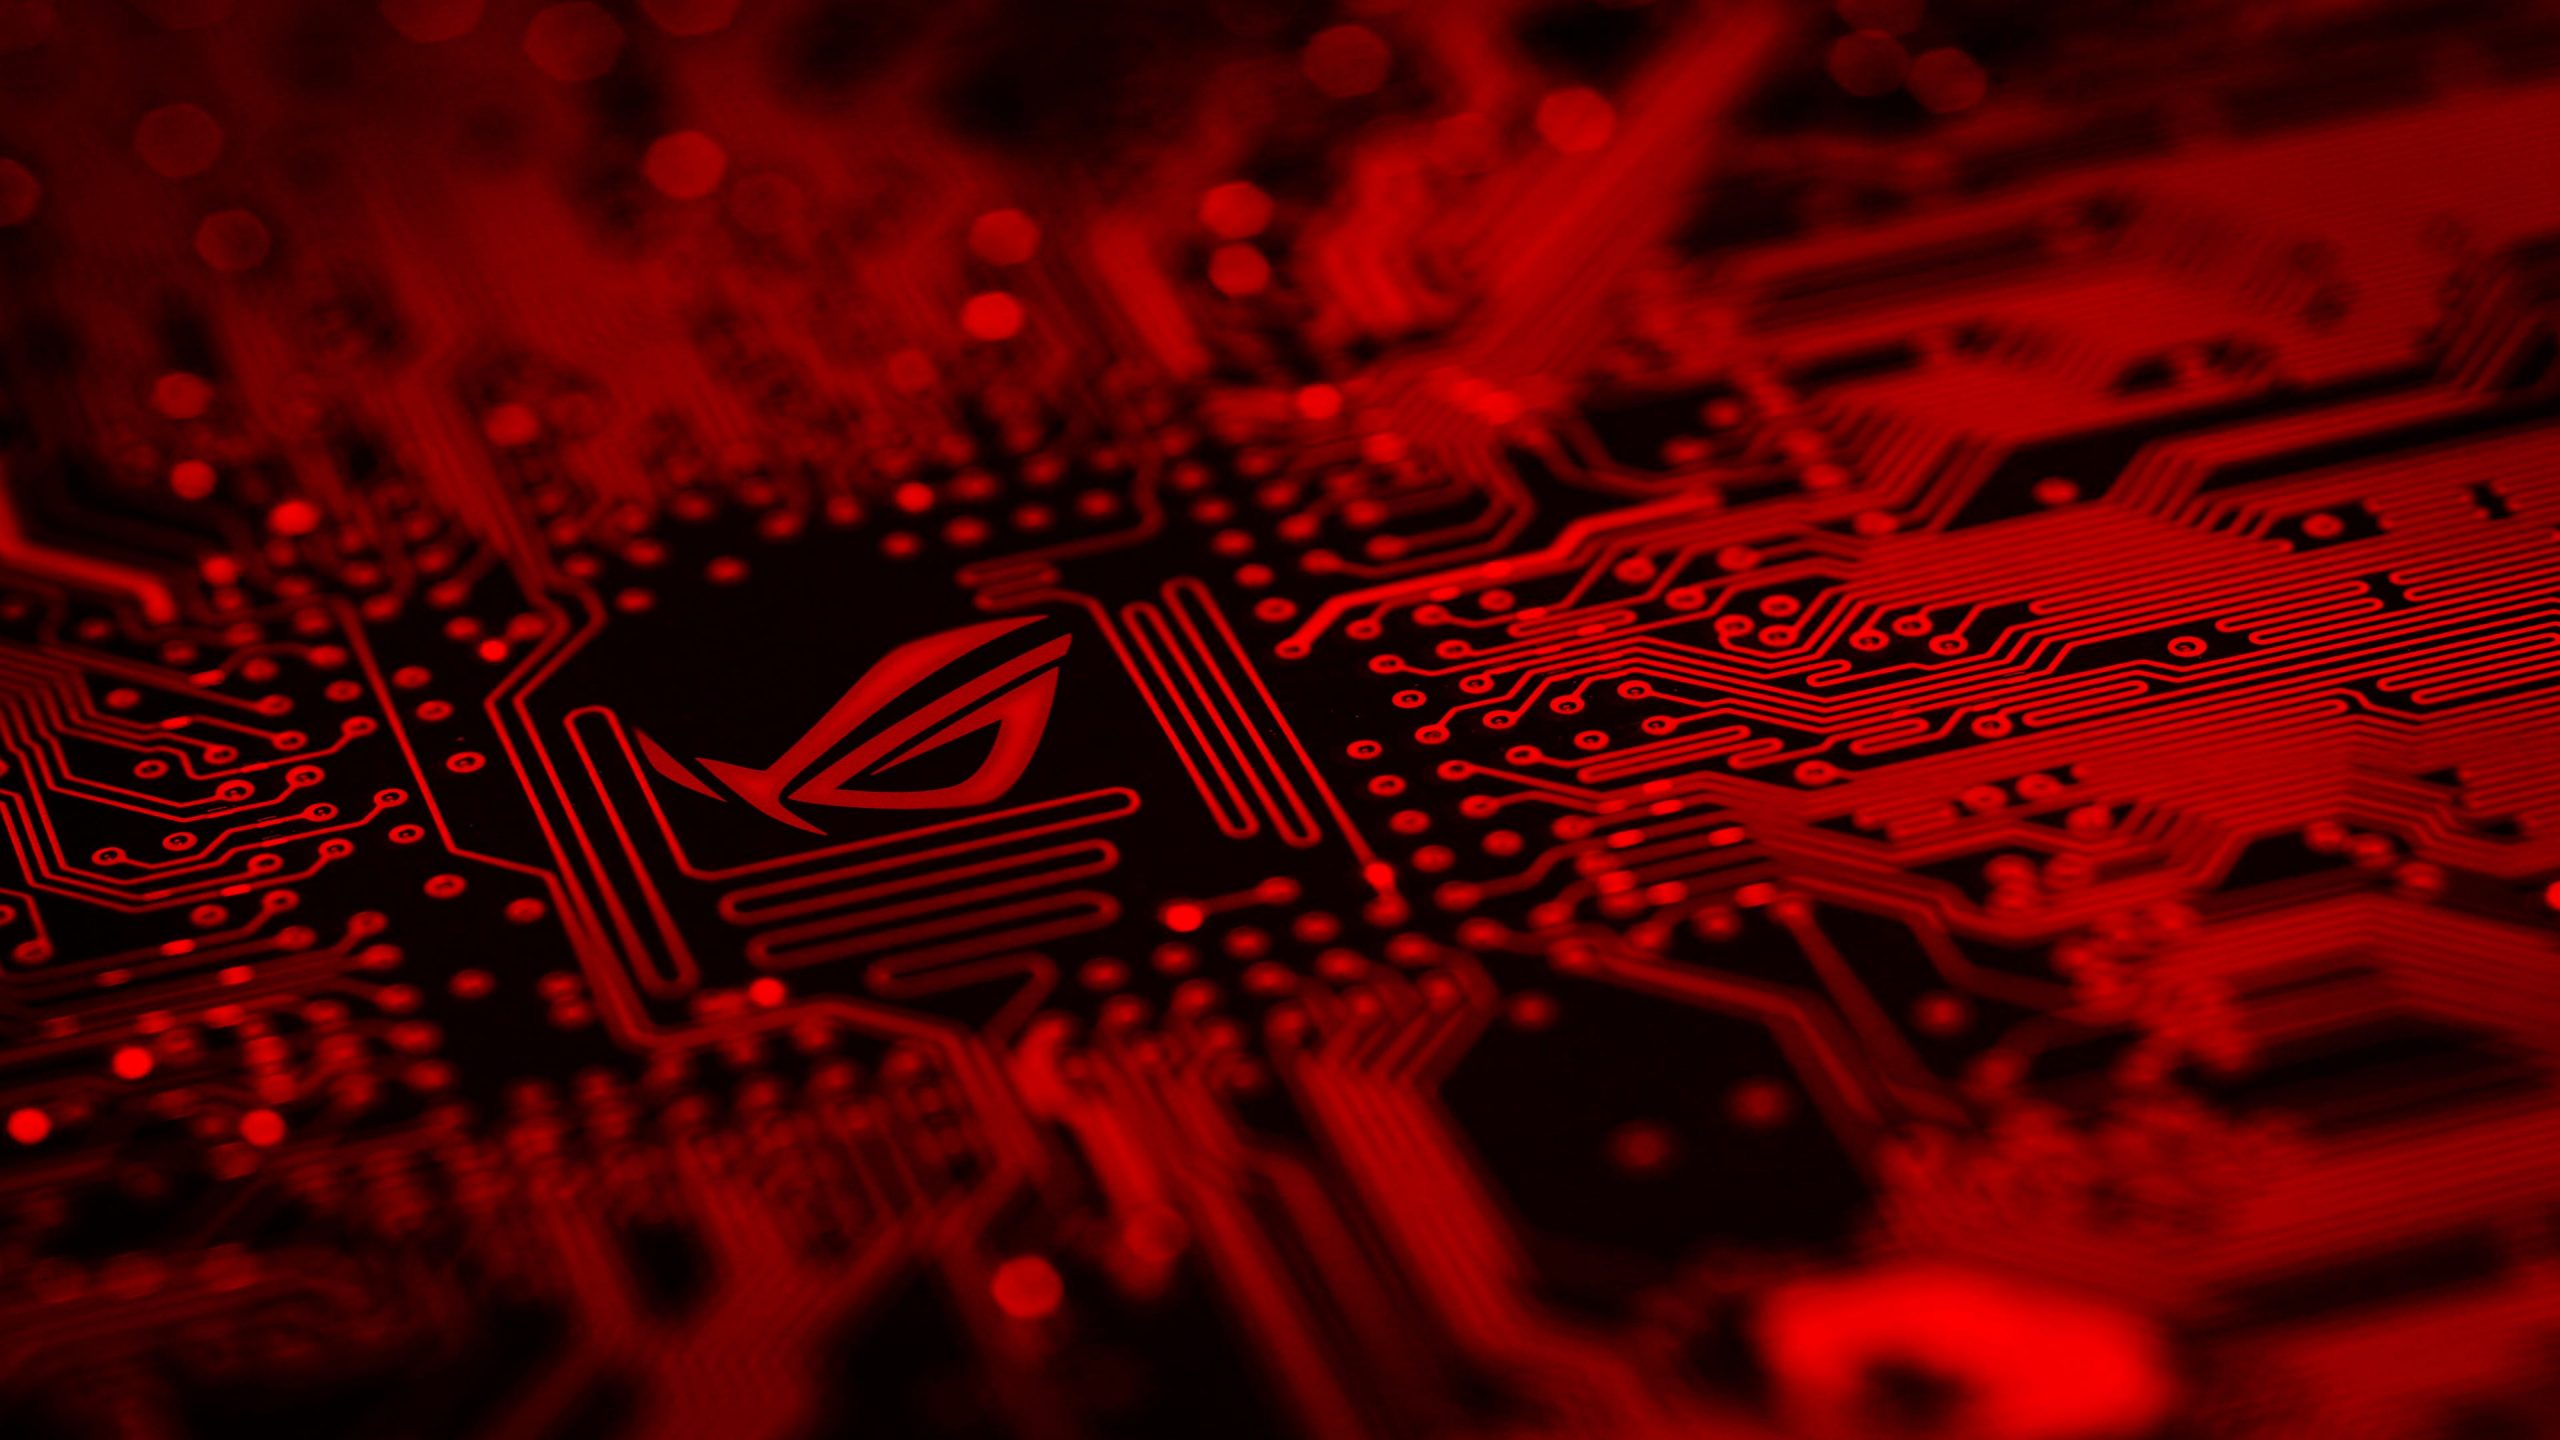 Red and black ROG logo, Asus Republic of Gamers logo, motherboards